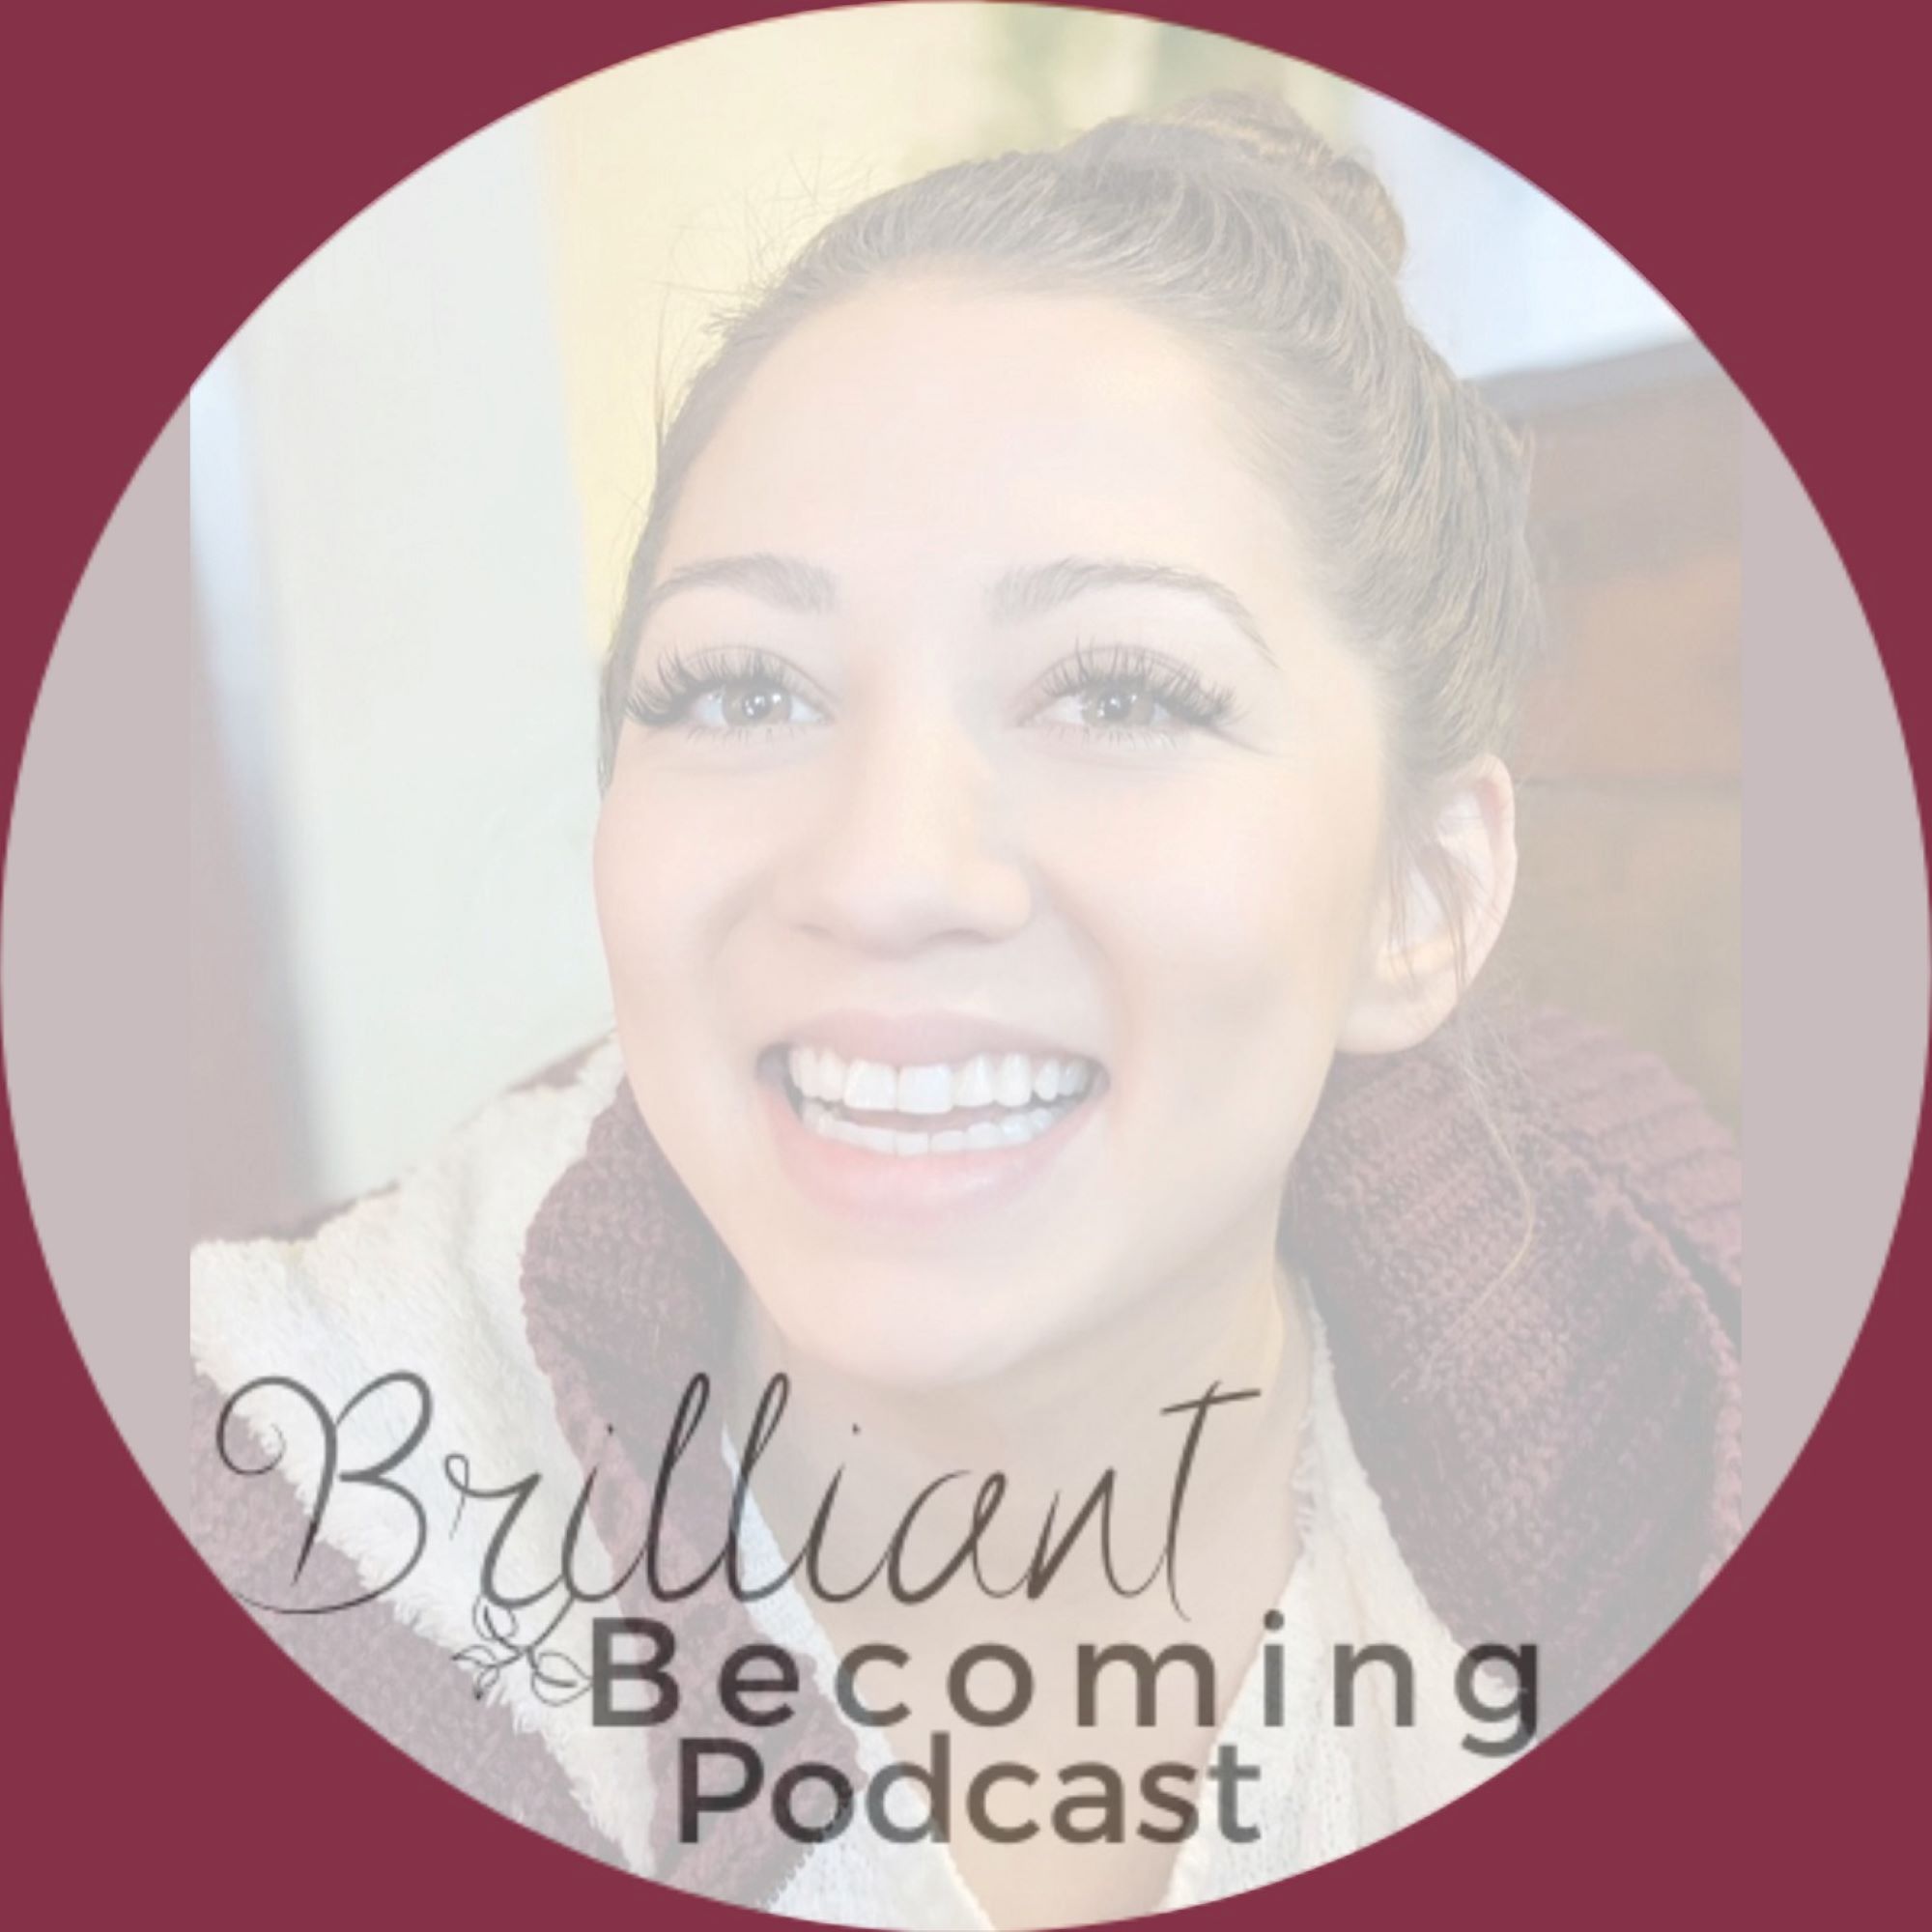 Brilliant Becoming Podcast